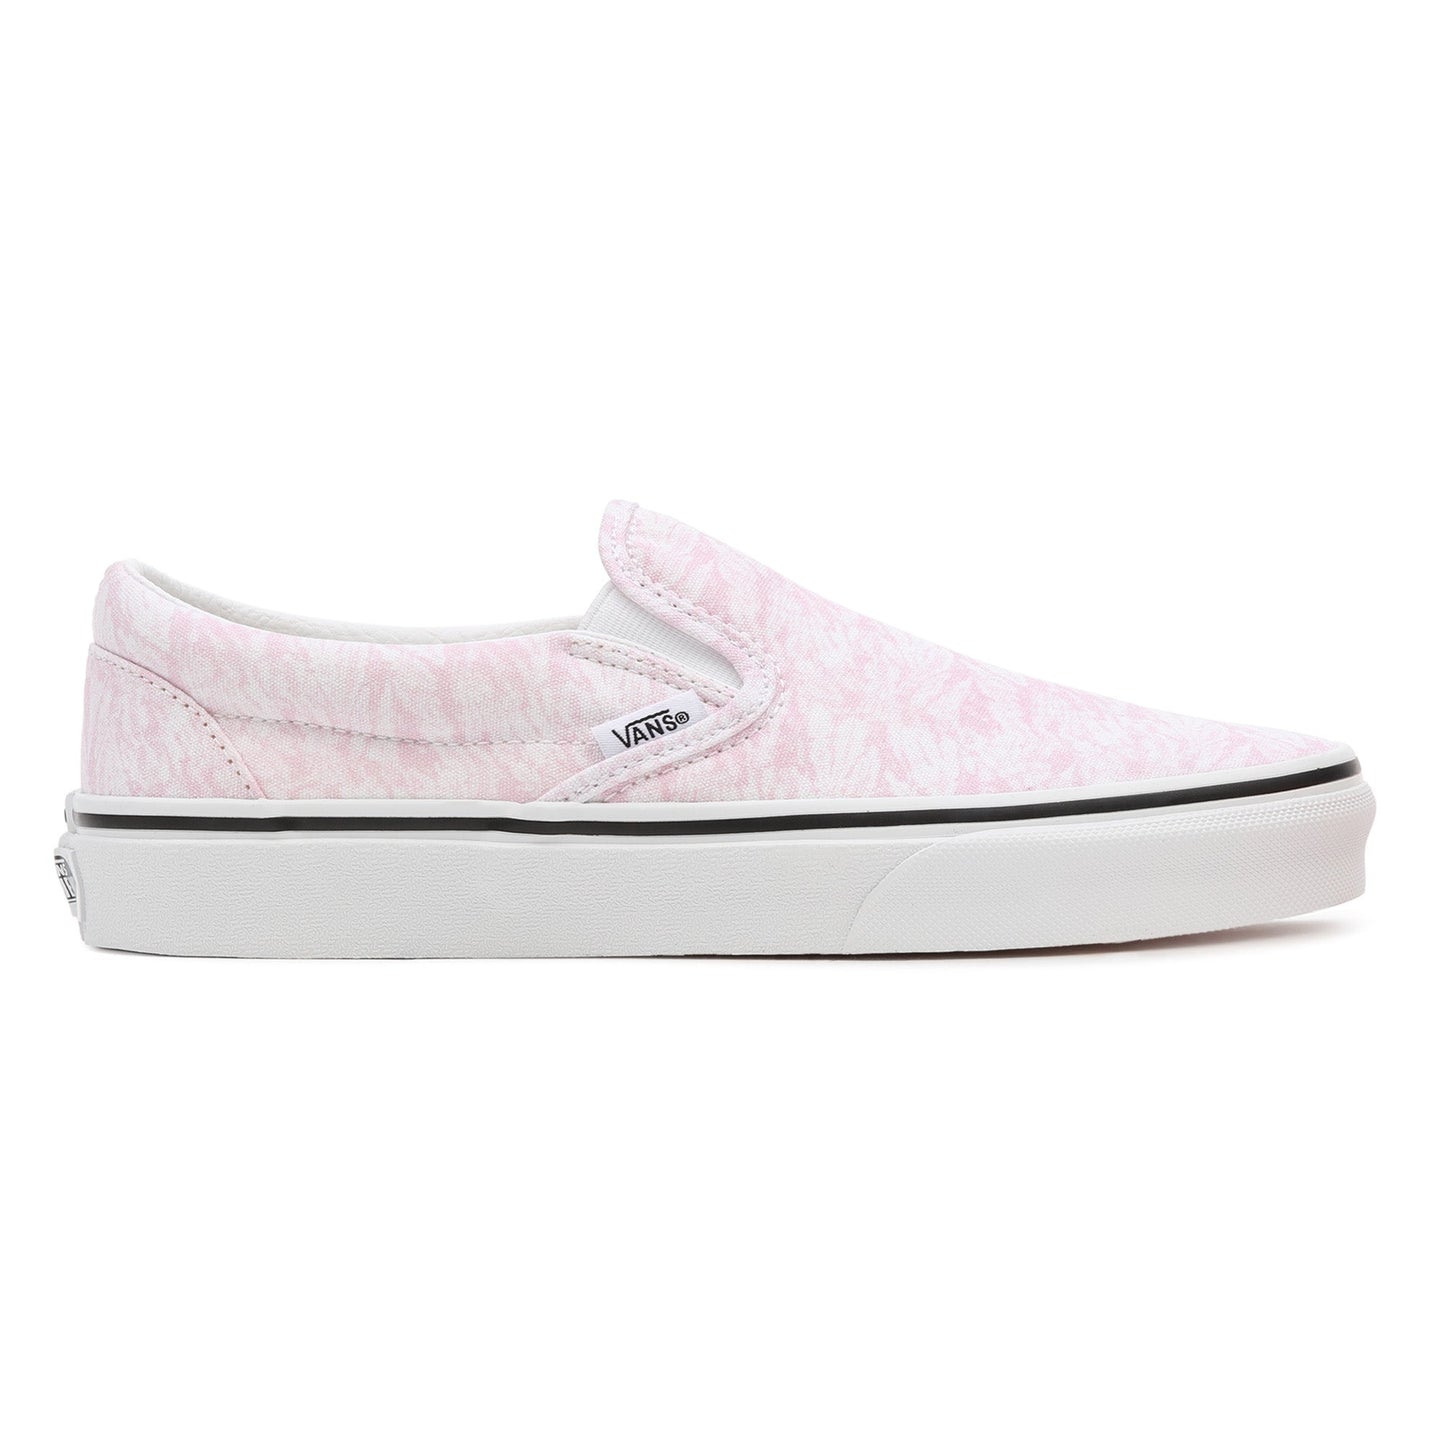 UA Classic Slip-on (Washes) Cradle Pink-True White - by Vans